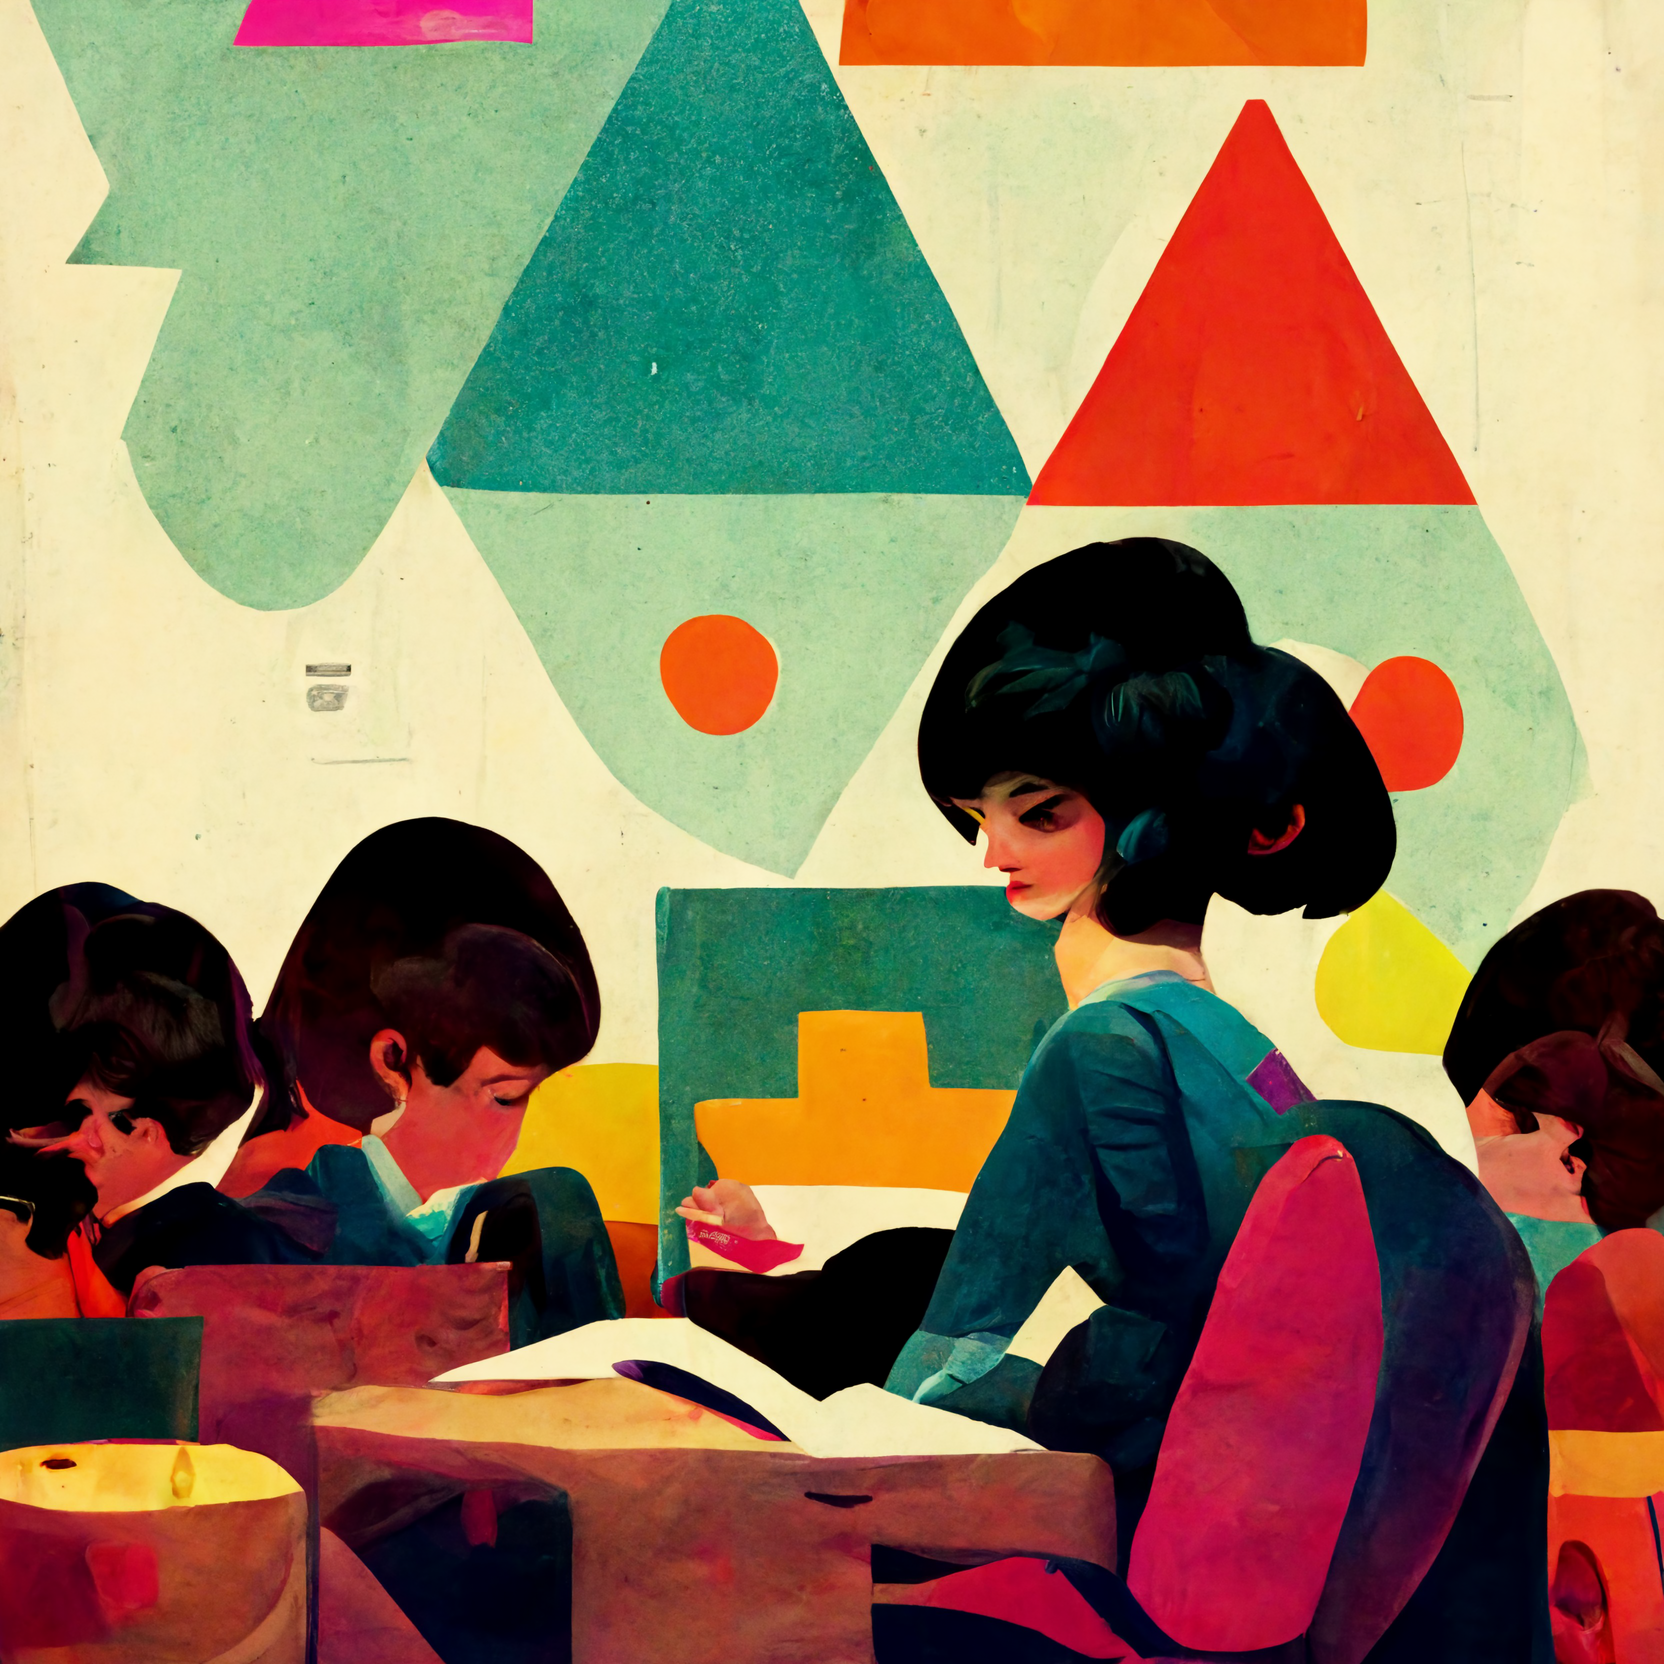 lahy_students_playing_classroom_books_on_desks_colorful_shapes__03cdcd59-ecb4-4fe5-8171-37e36ead0c5e.png